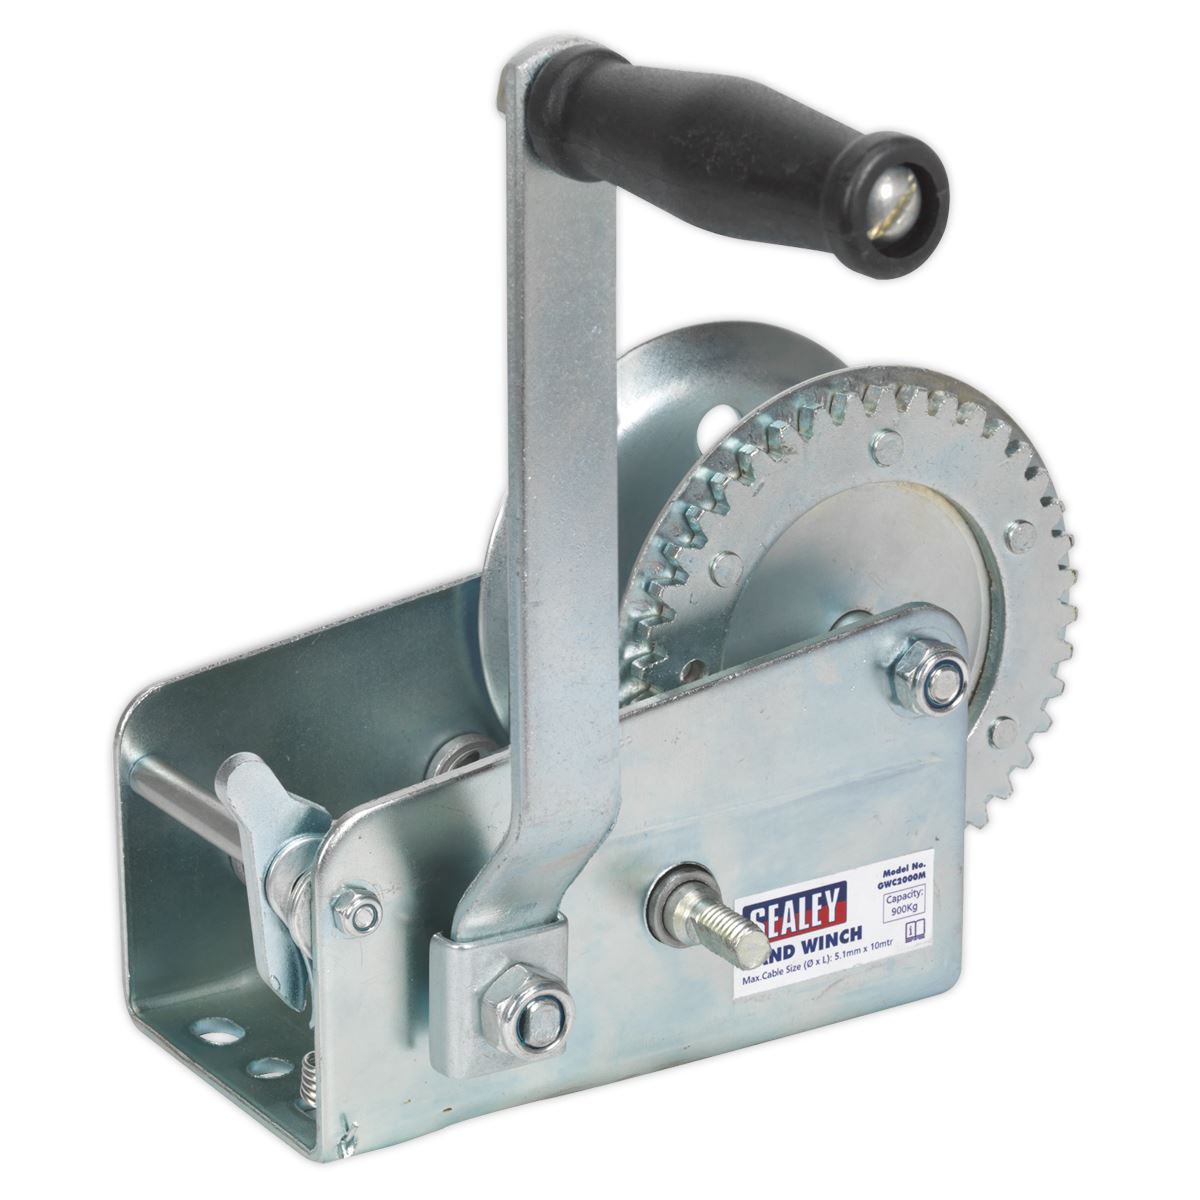 Sealey Geared Hand Winch 900kg Capacity